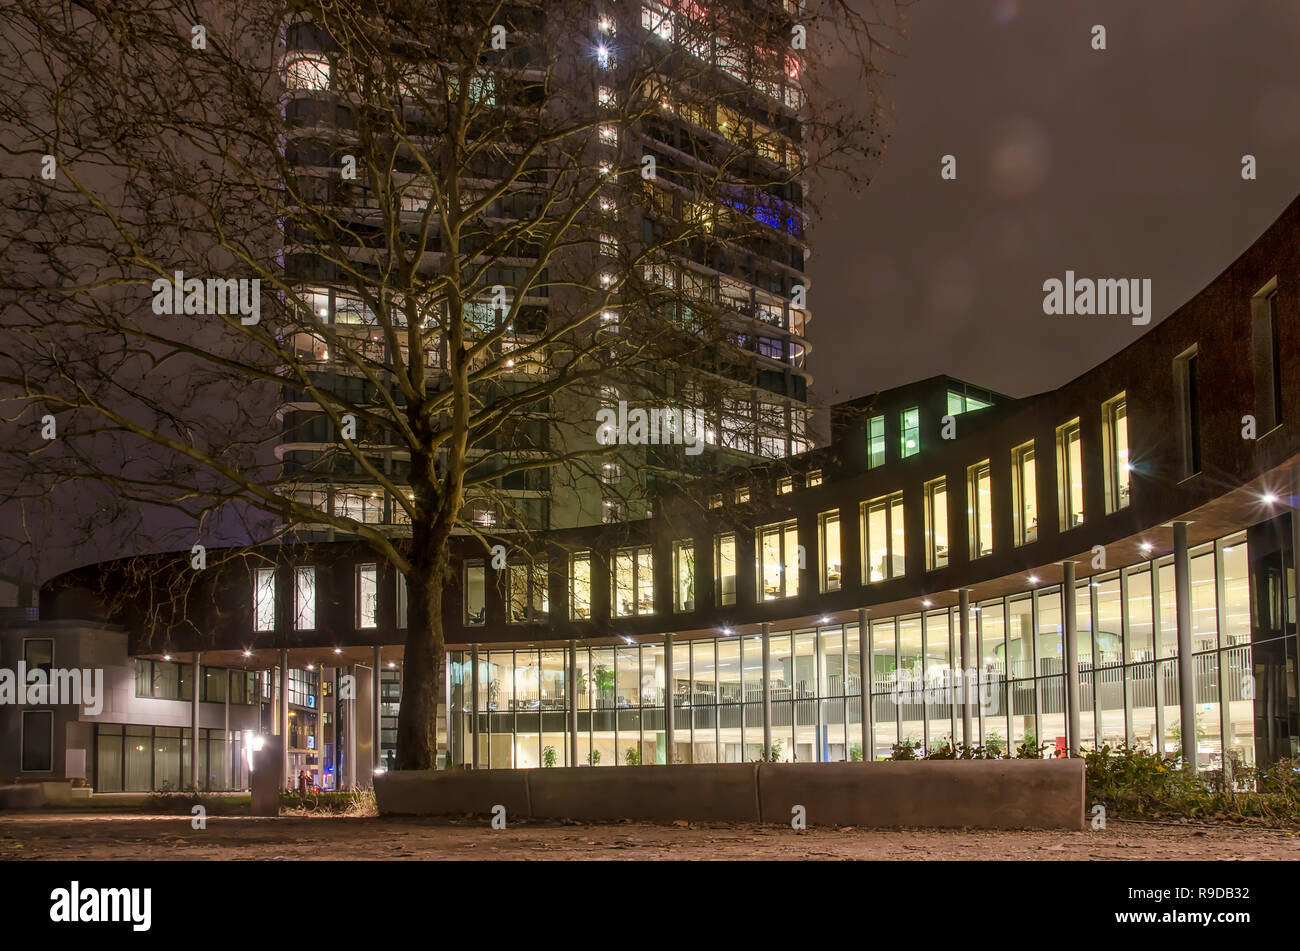 Eindhoven, The Netherlands, December 14, 2018: night view of offices around a courtyard off Smalle Haven, with the residential Vestada tower in the ba Stock Photo